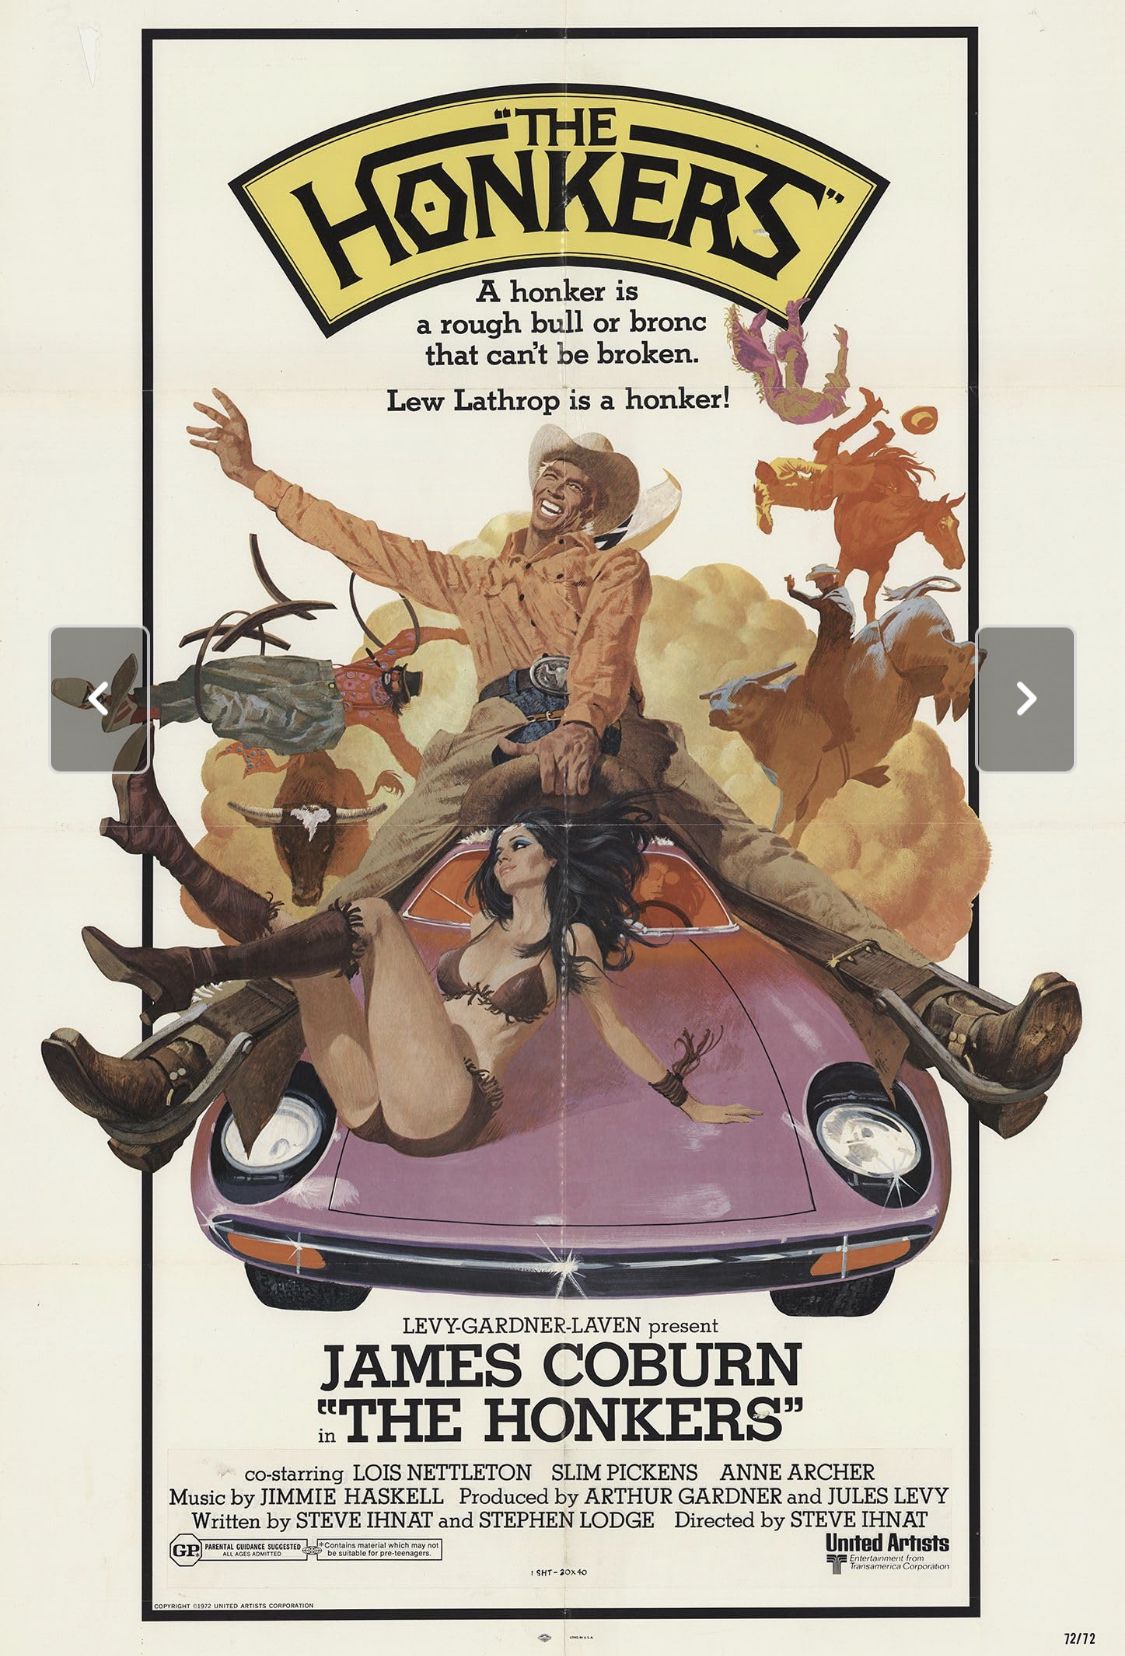 Movie poster featuring cowboy and bikini girl